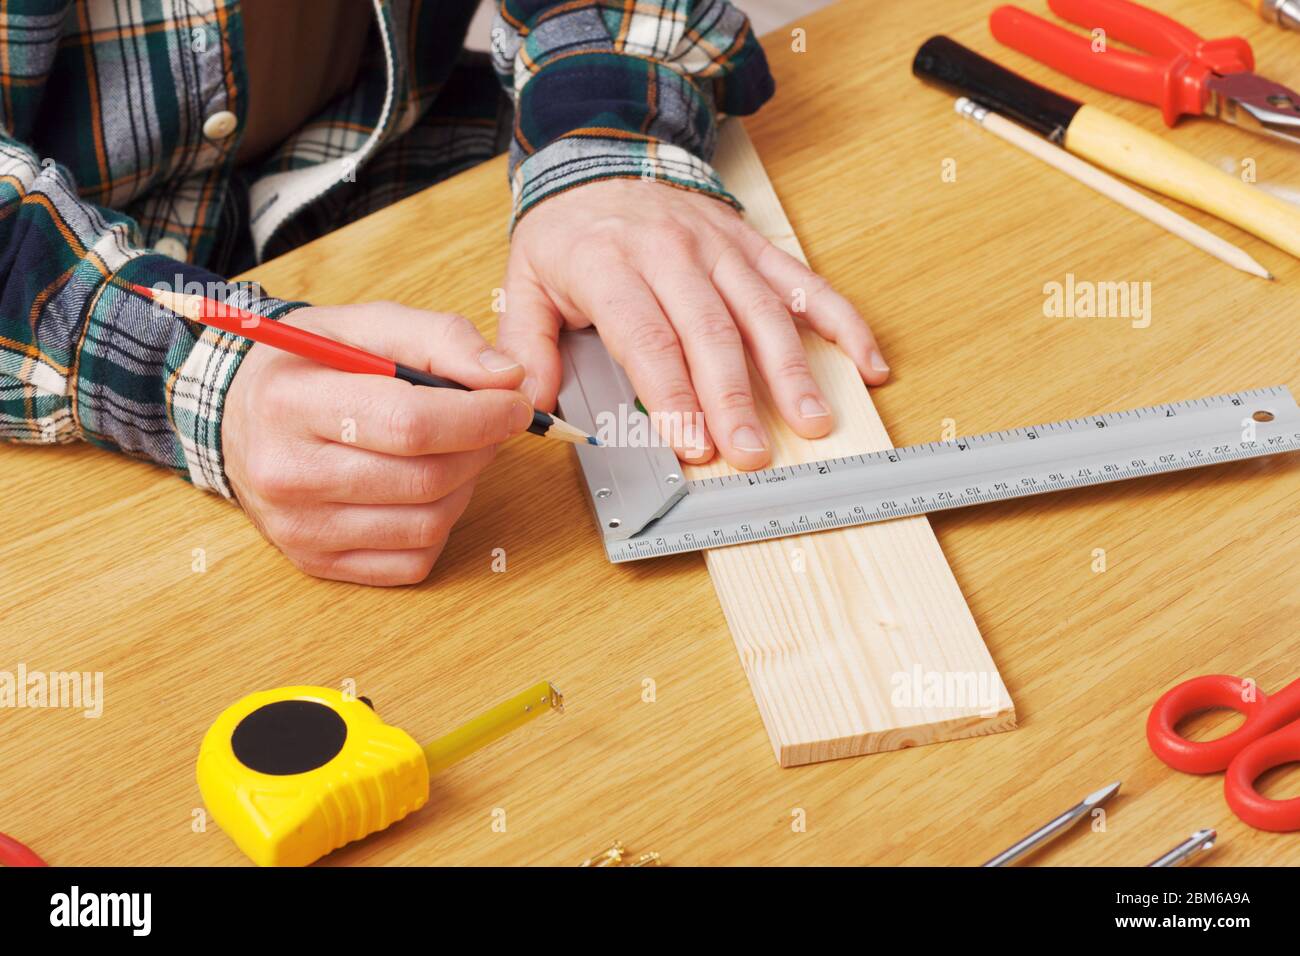 Man working on a DIY project and measuring a wooden plank with work tools all around, hands close up Stock Photo